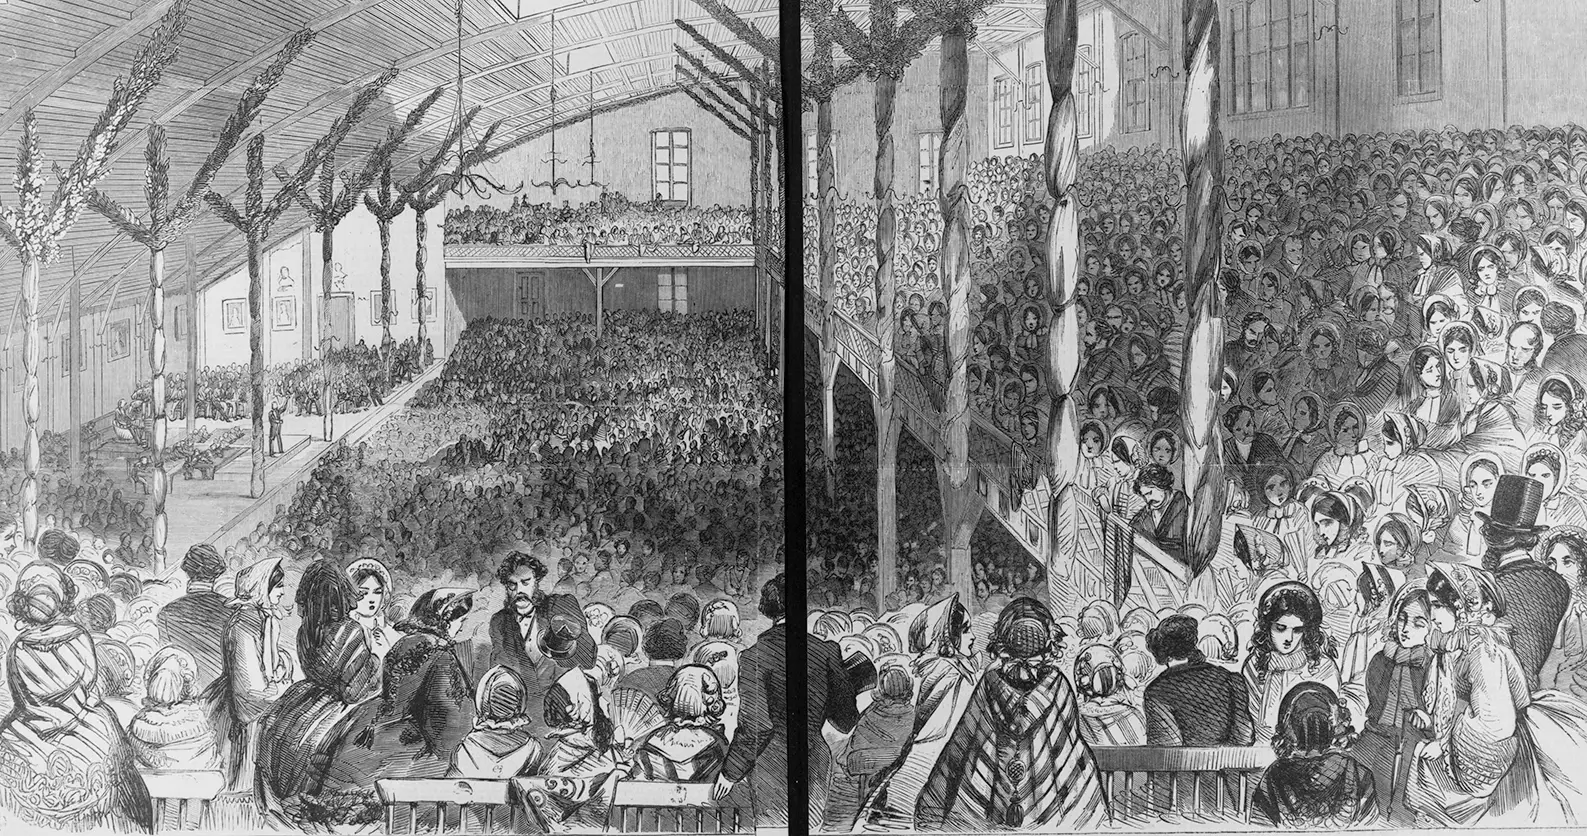 Black and white illustration of a large indoor hall, with wooden pillars, filled with convention of people.